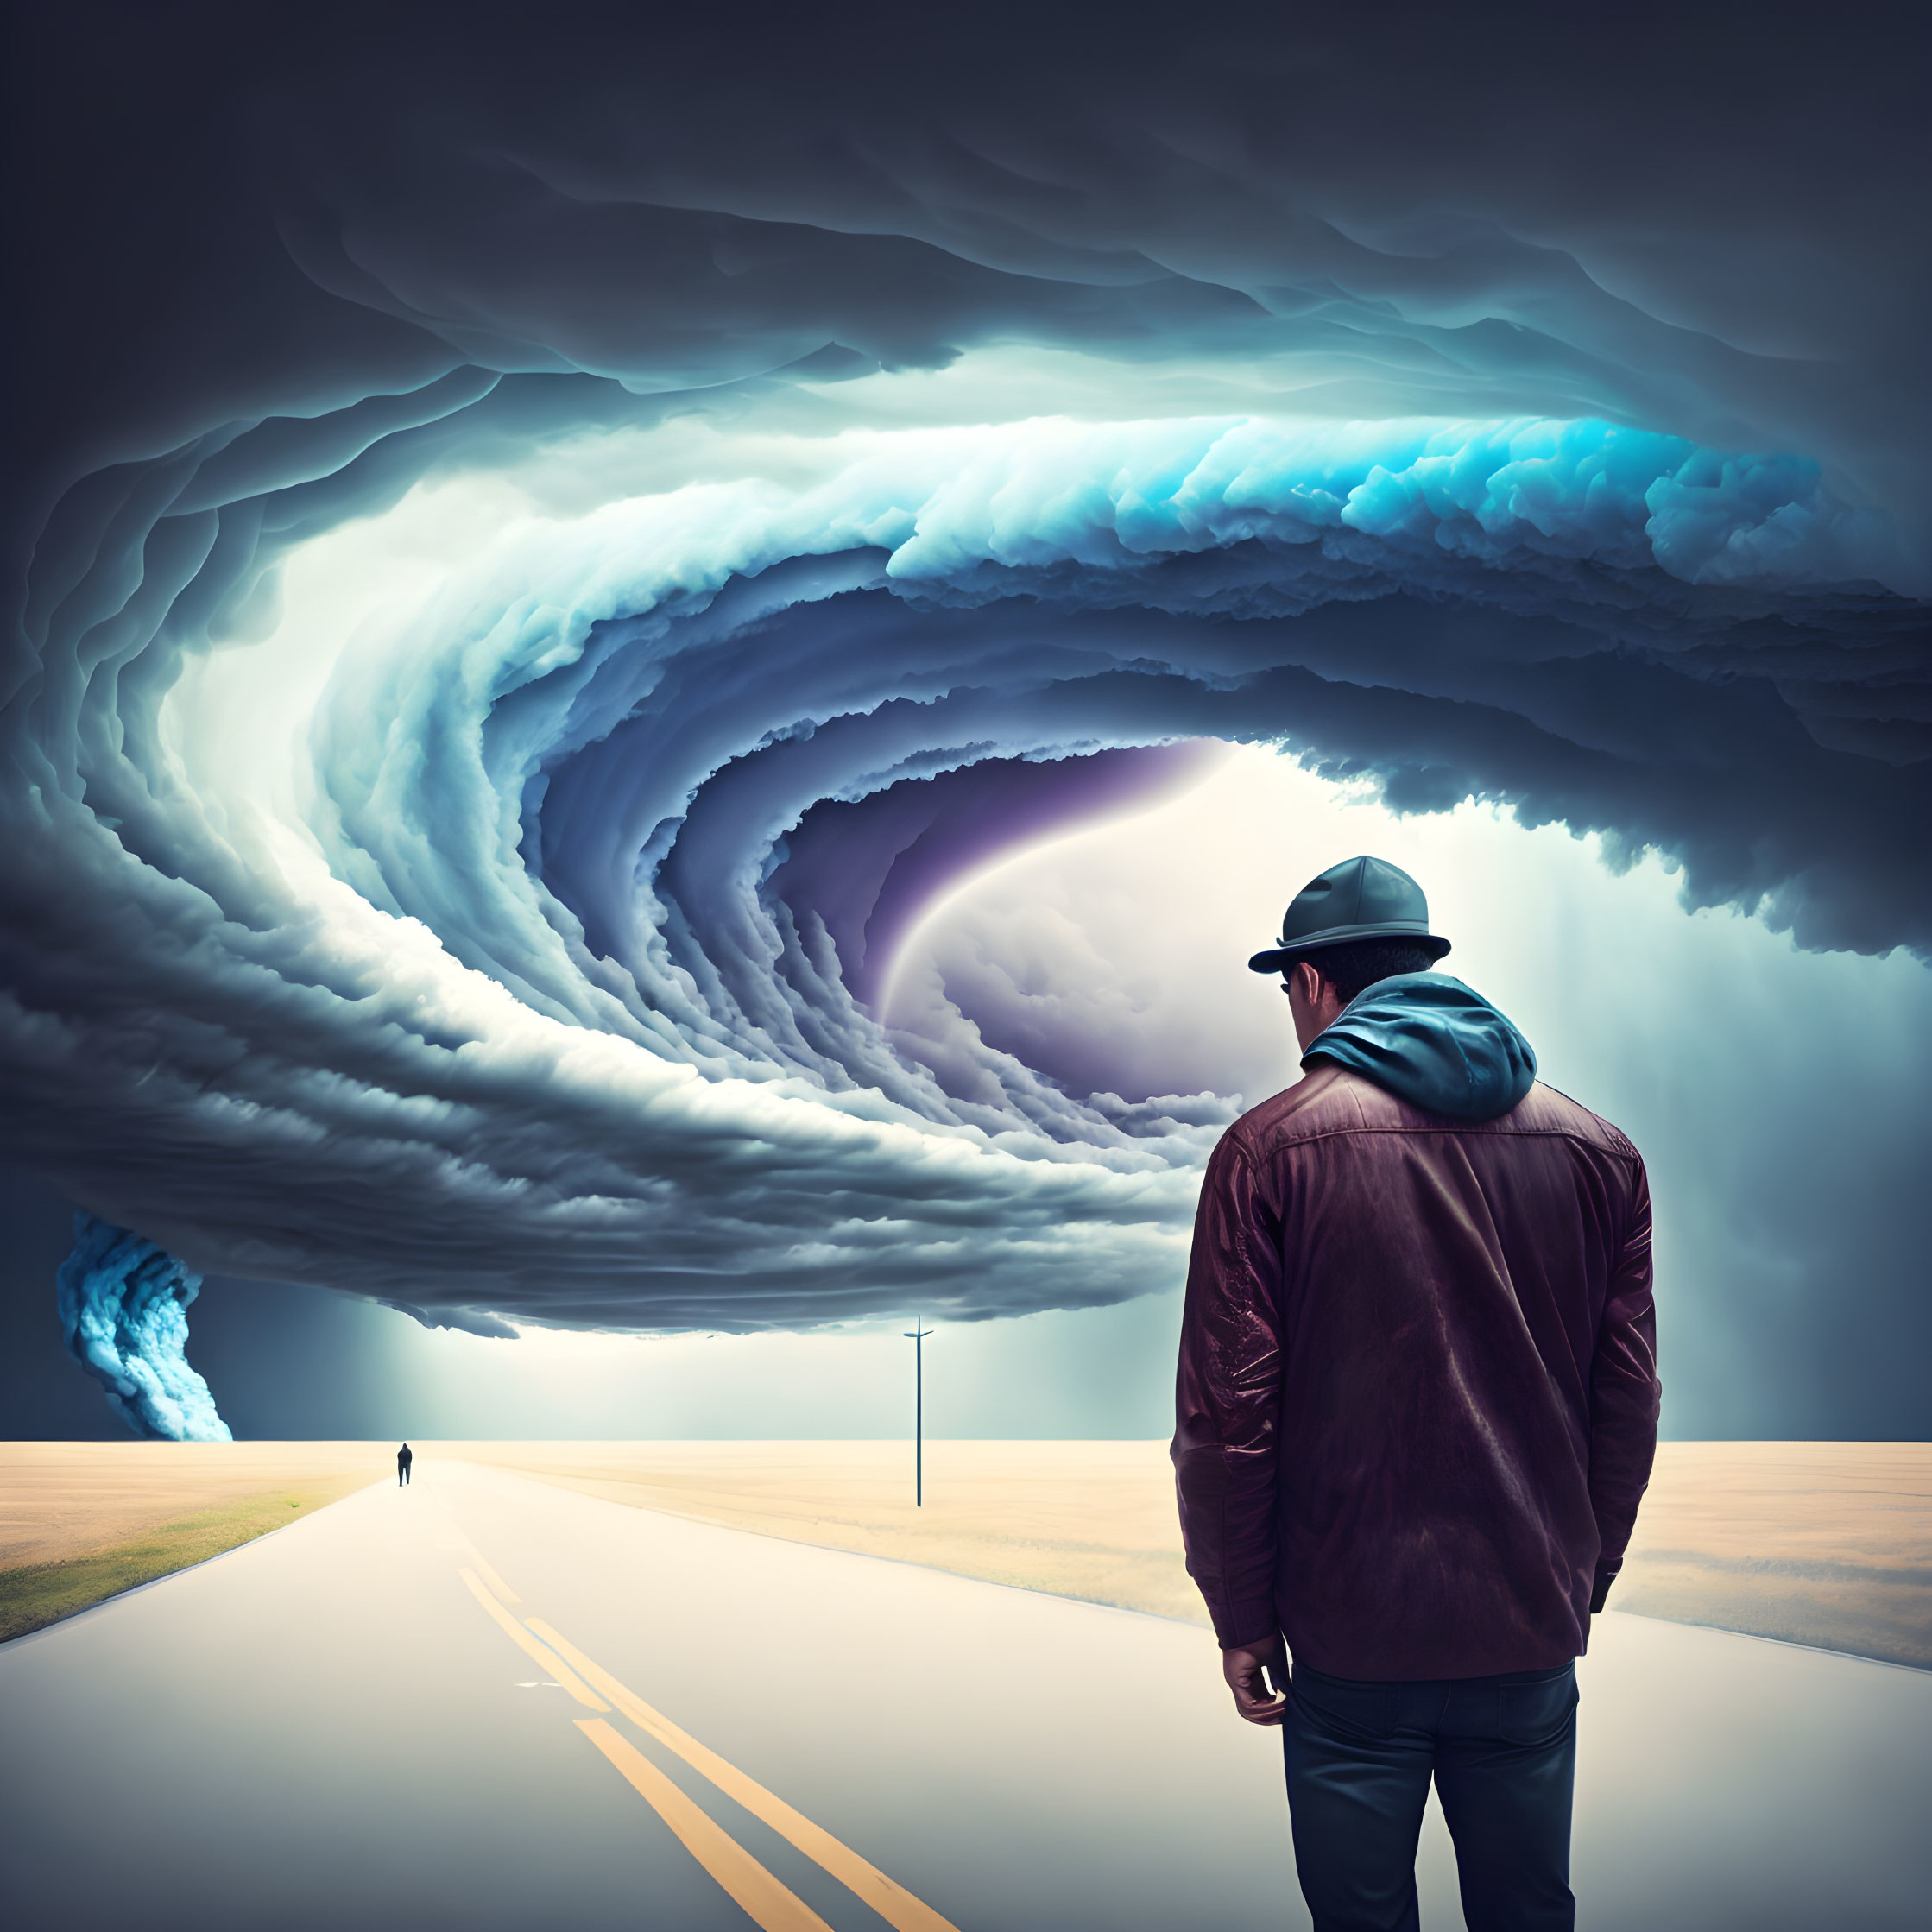 Person in jacket and hat faces swirling vortex in sky on empty road